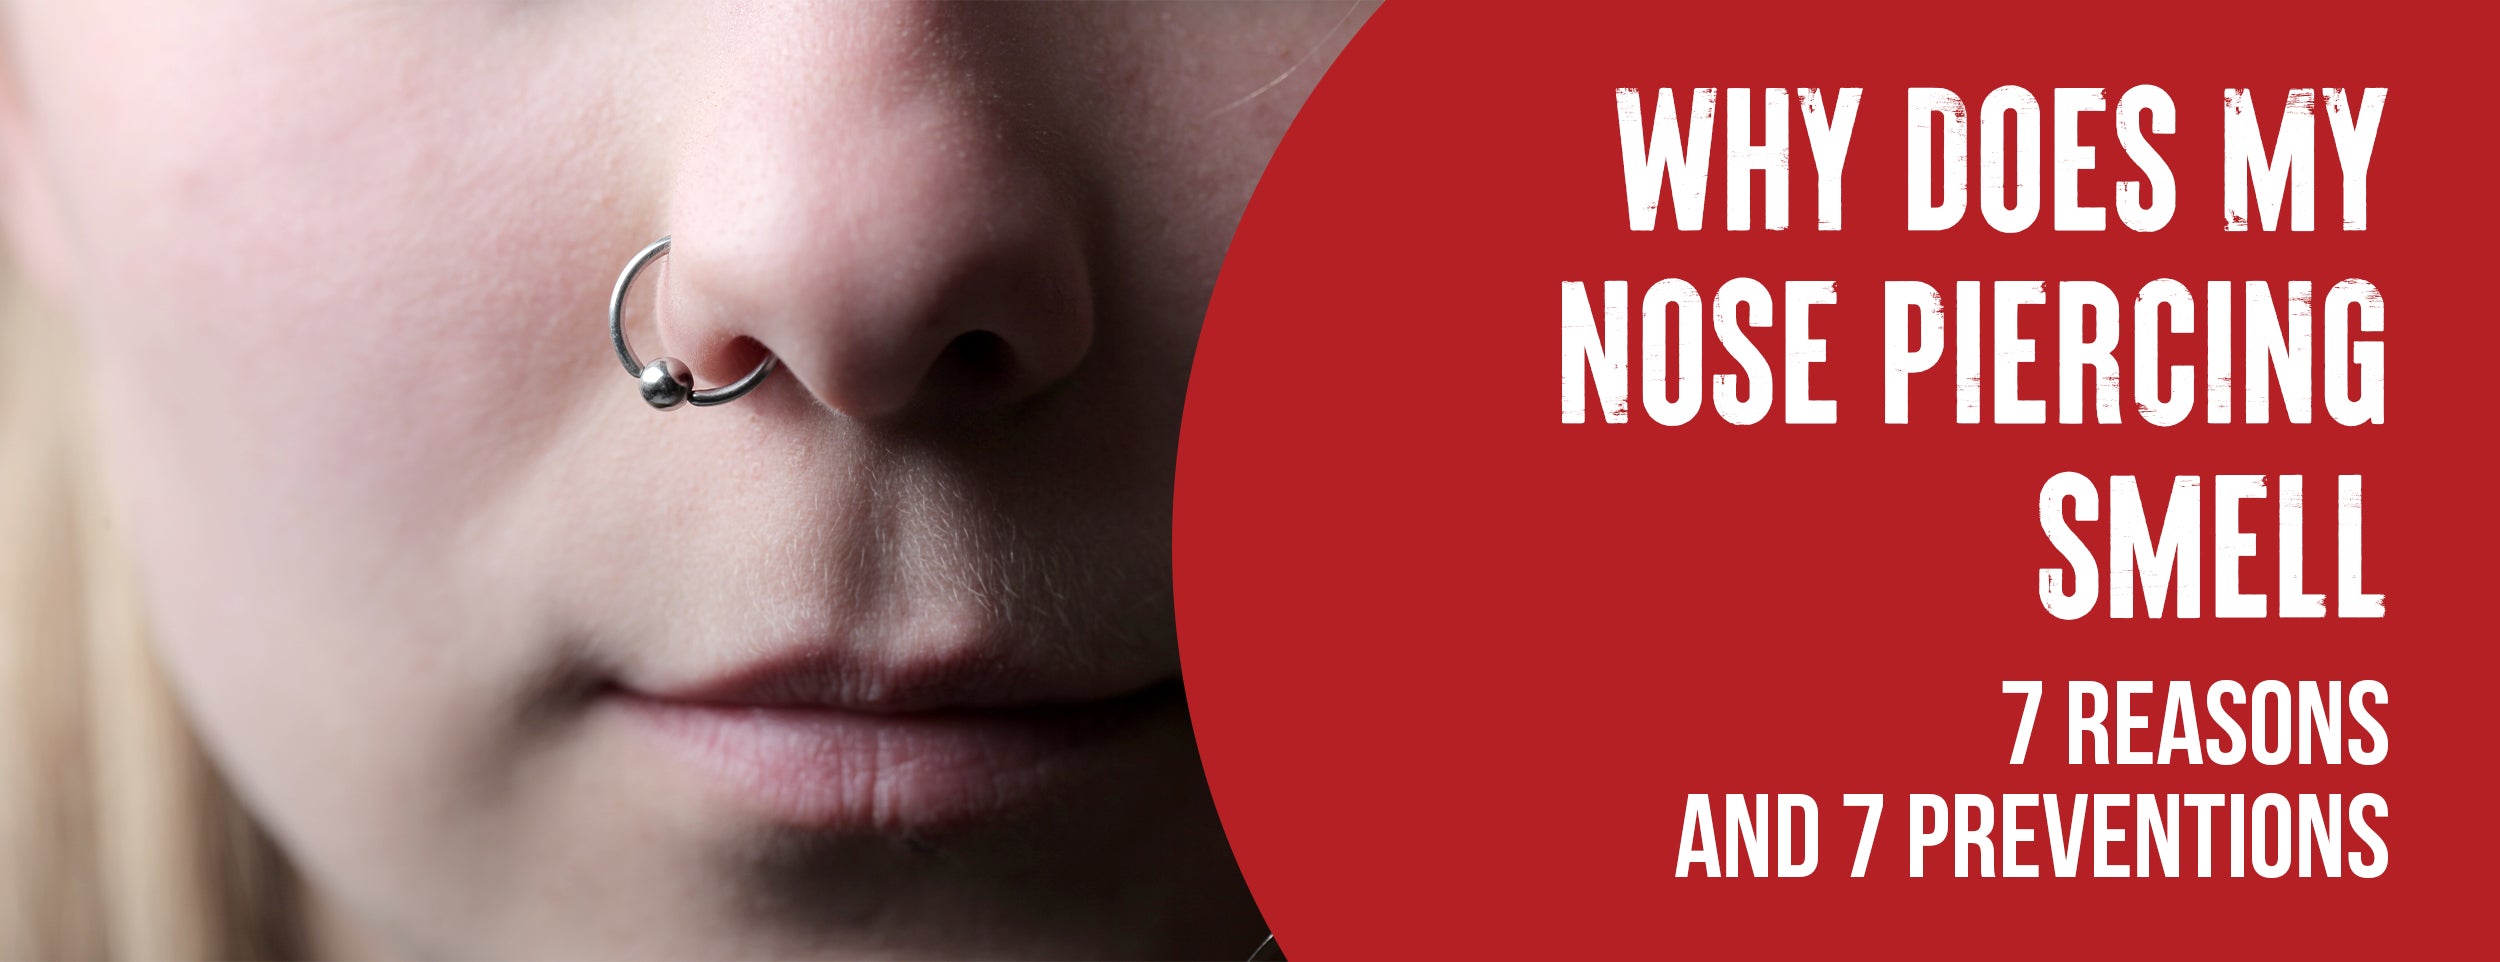 7 Reasons Your Nose Piercing Smells, and 7 Tips to Prevent It